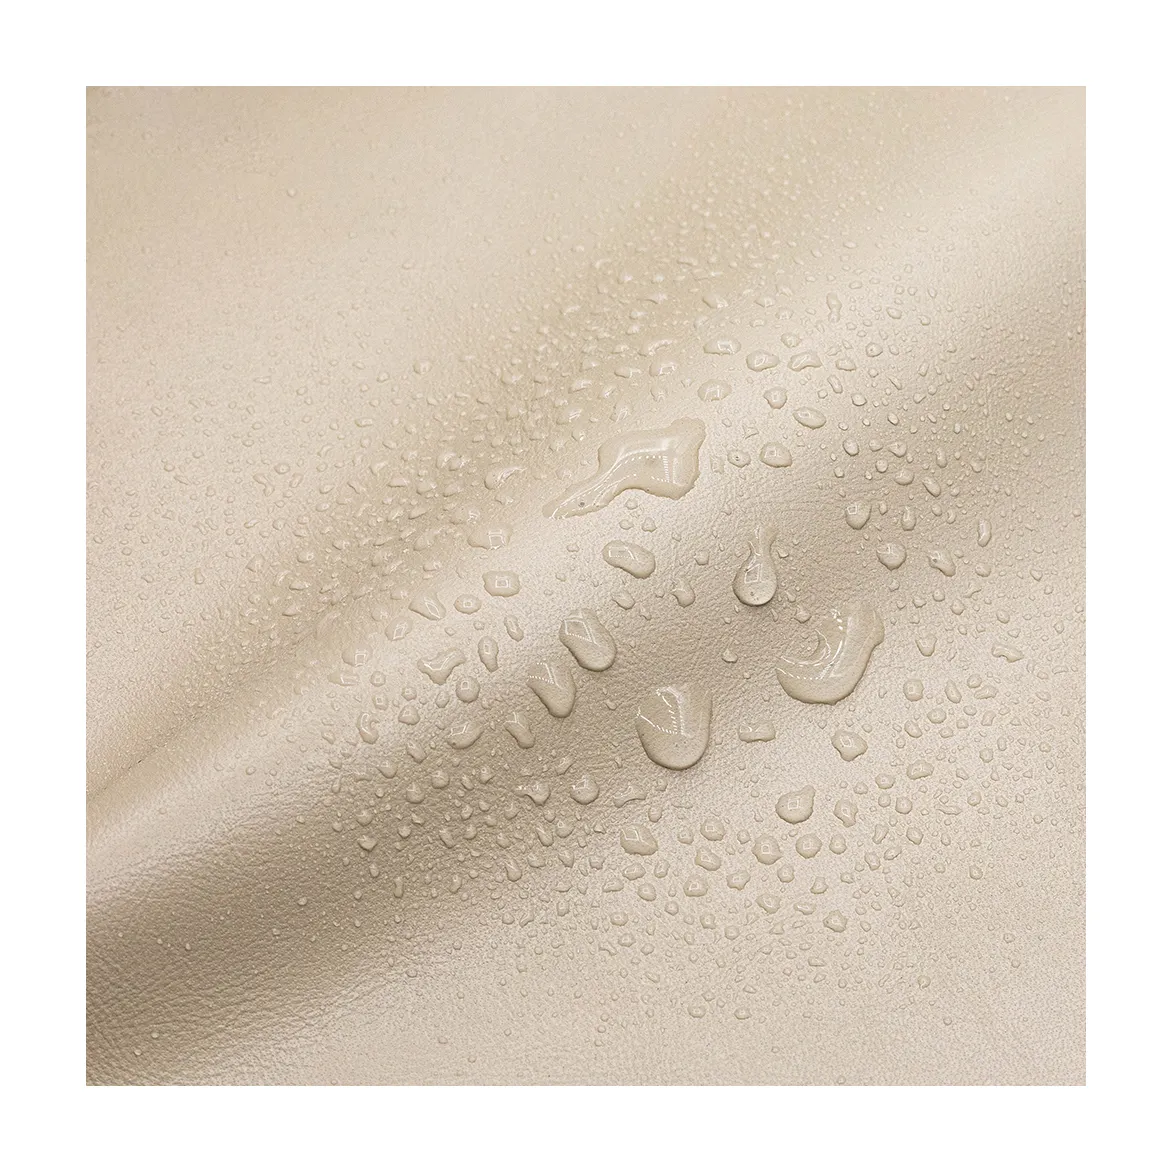 Free Sample Elephant Grain Pu Faux Leather Material For Cloth, Elastic Soft Fiber Velvet Base Eco Recycling Rexine Leather Rolls